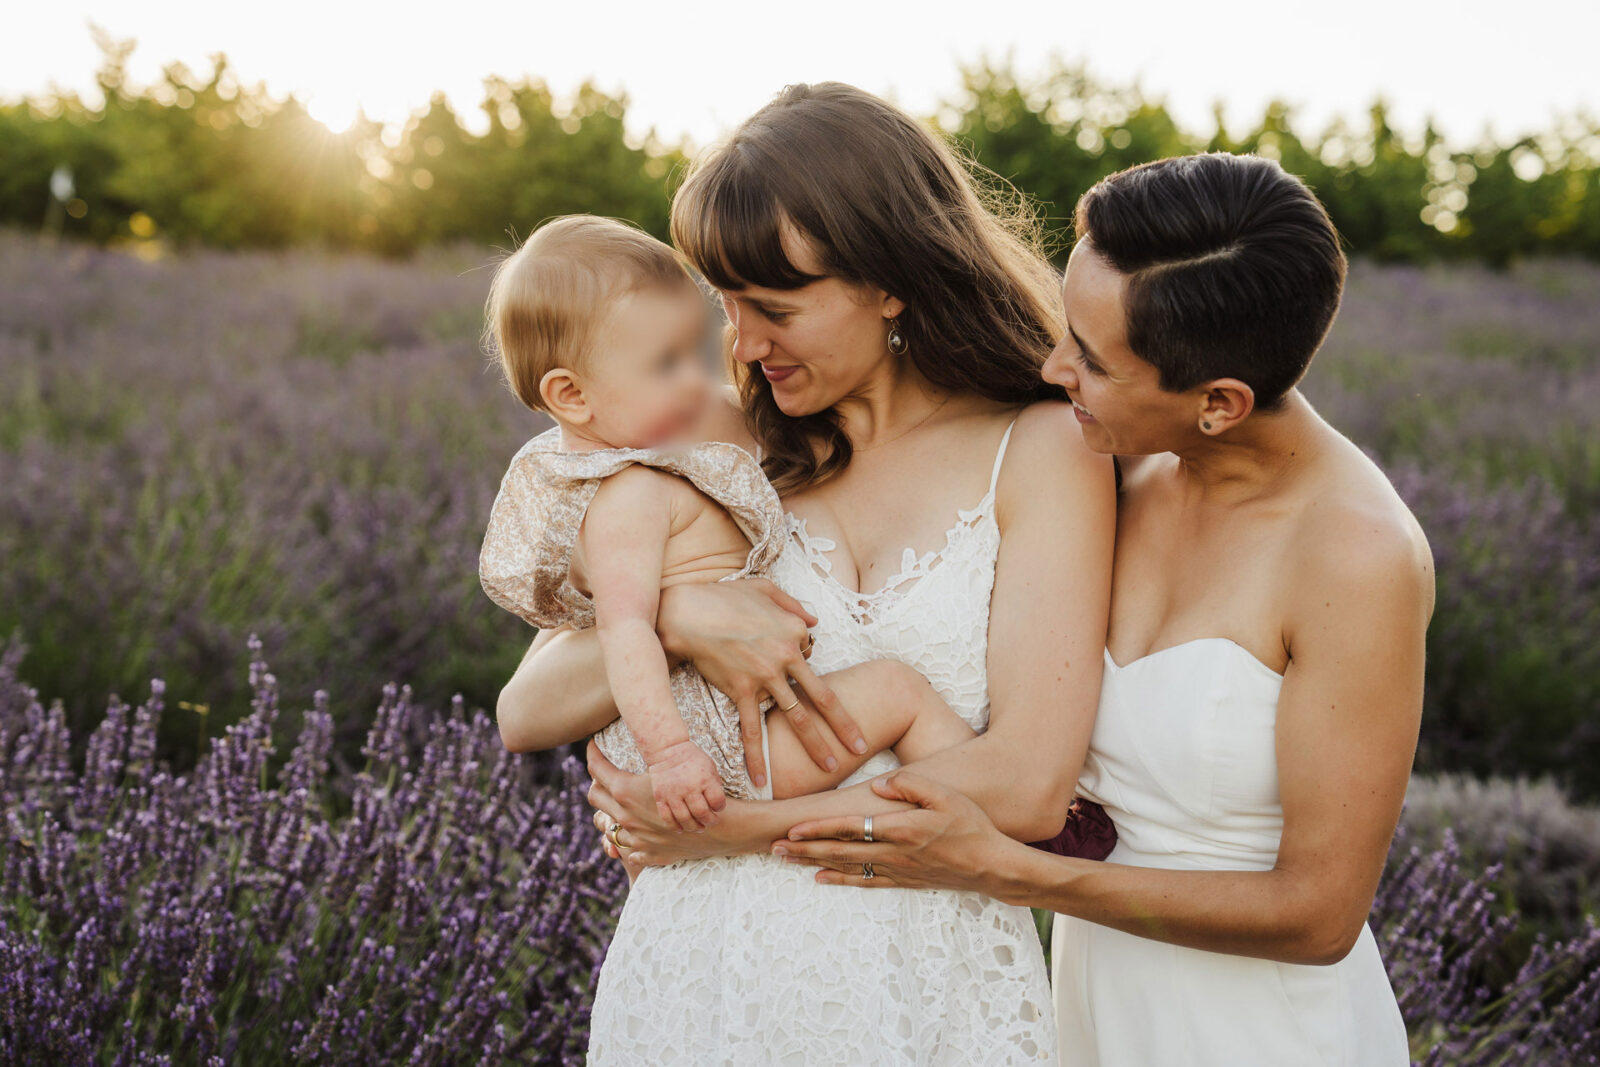 Lavender field family photography by Natalie Broders in Banks, OR - July 4 through July 21